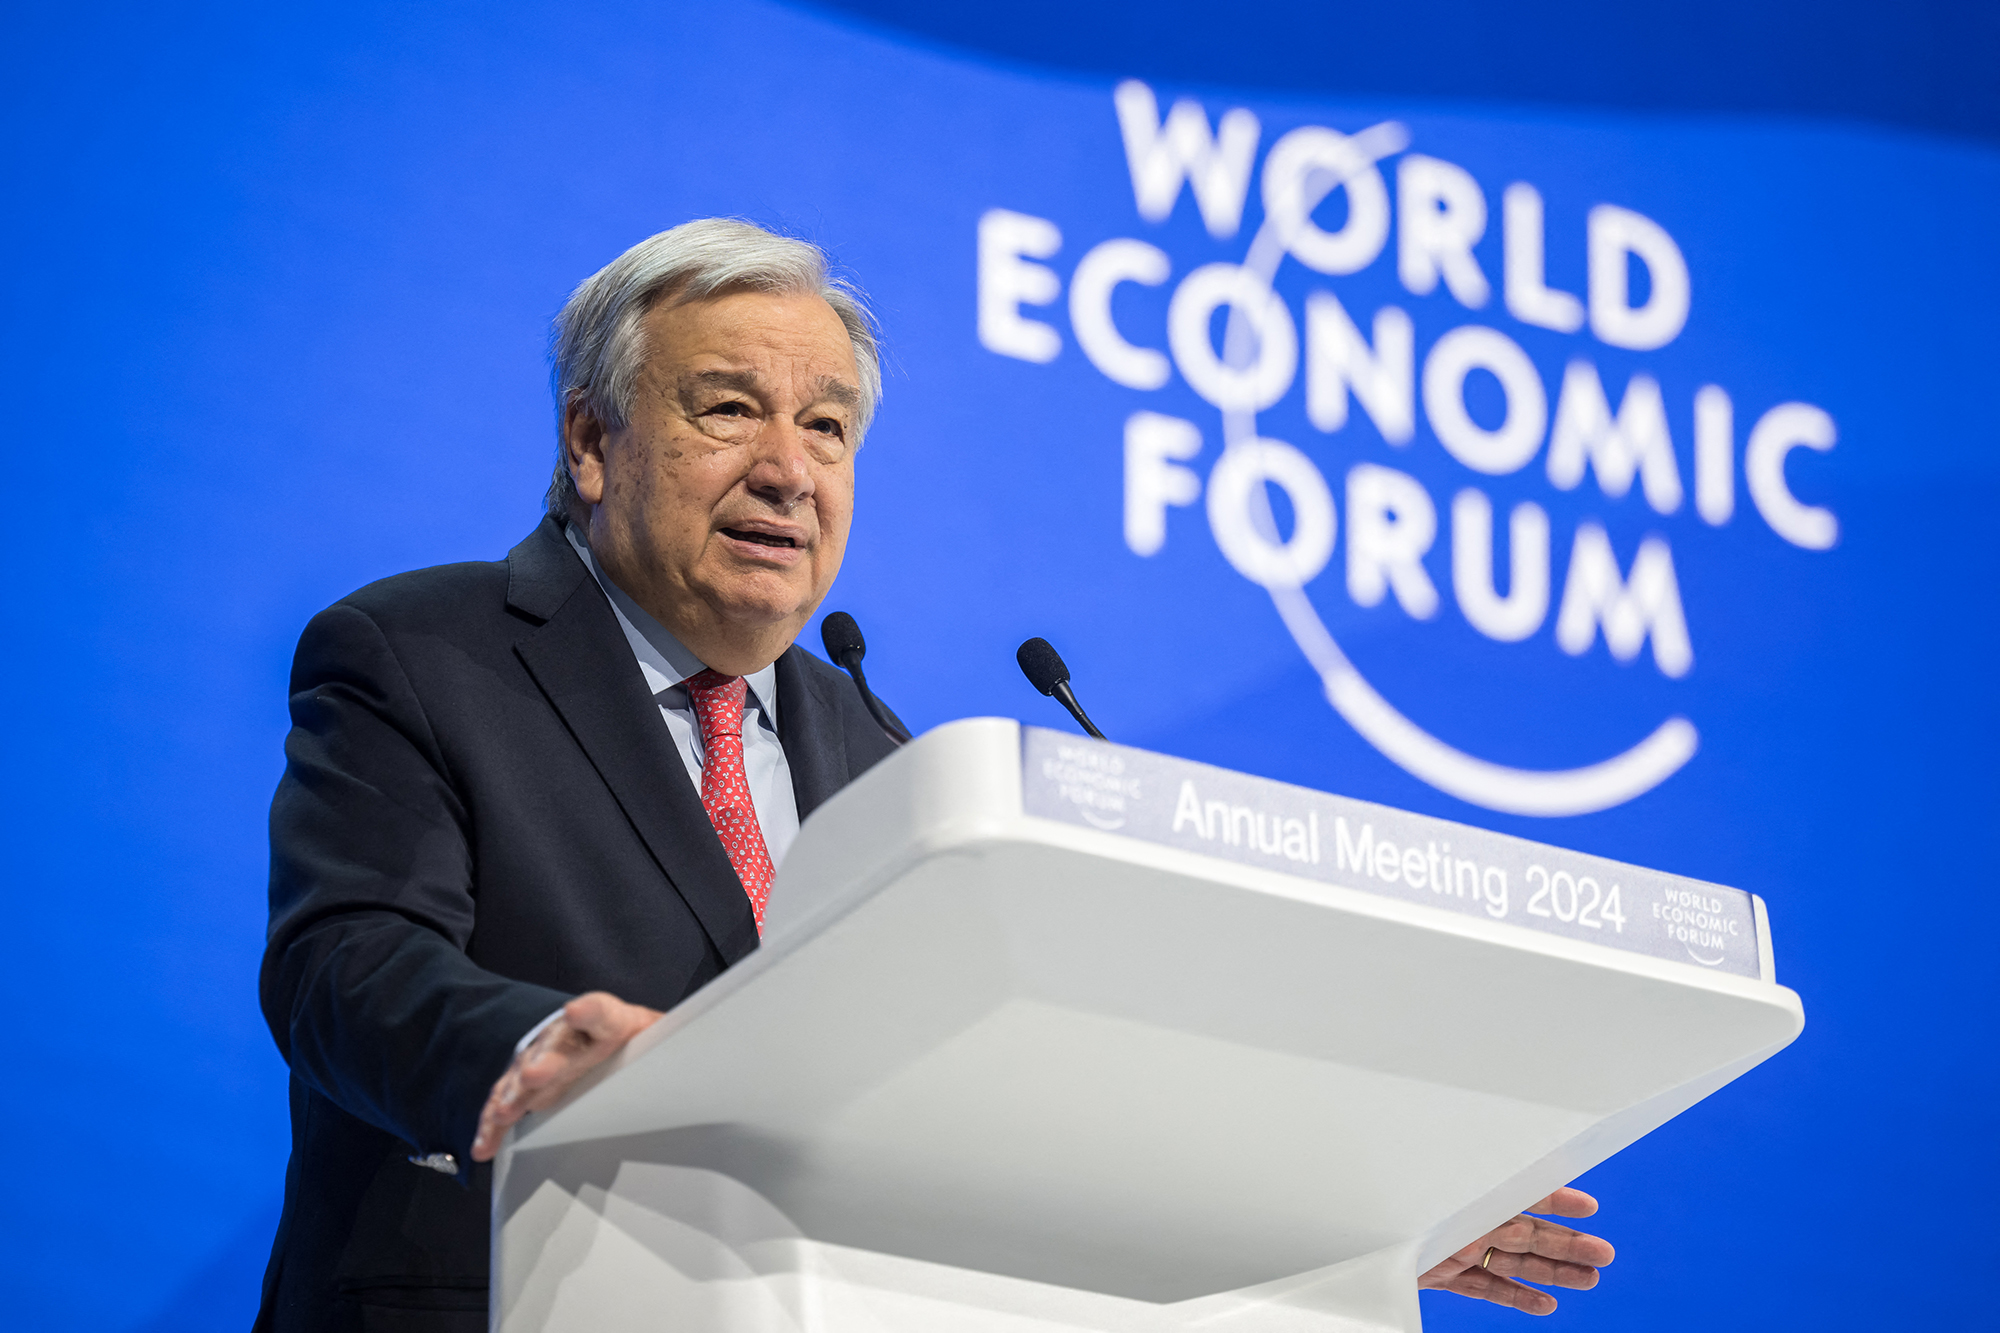 UN Secretary-General Antonio Guterres addresses the assembly during the World Economic Forum (WEF) meeting in Davos, Switzerland, on January 17.